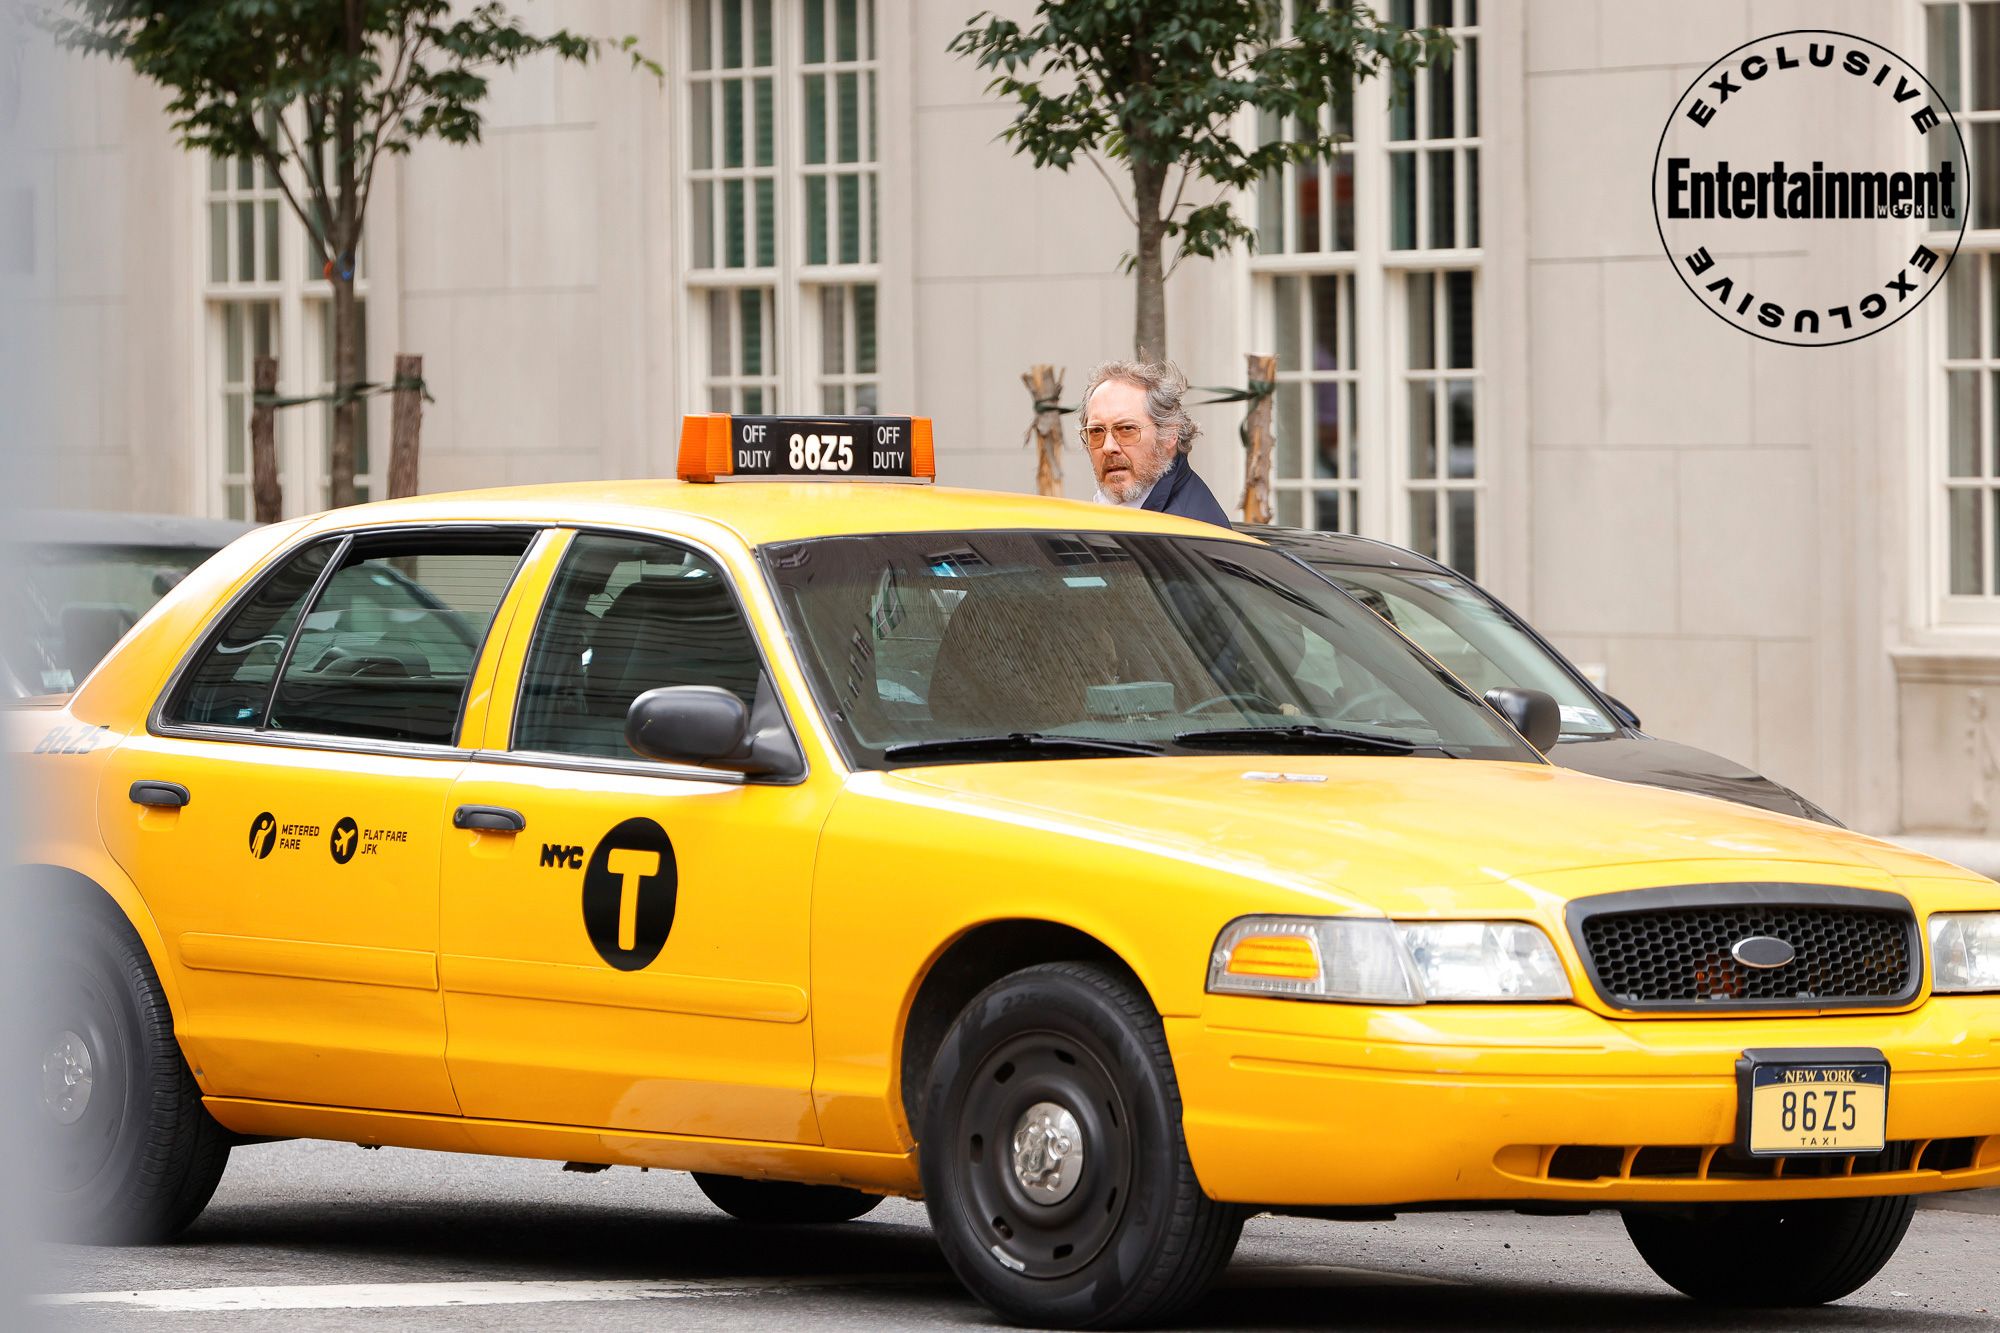 Reddington getting in a taxi with a beard and hair in The Blacklist